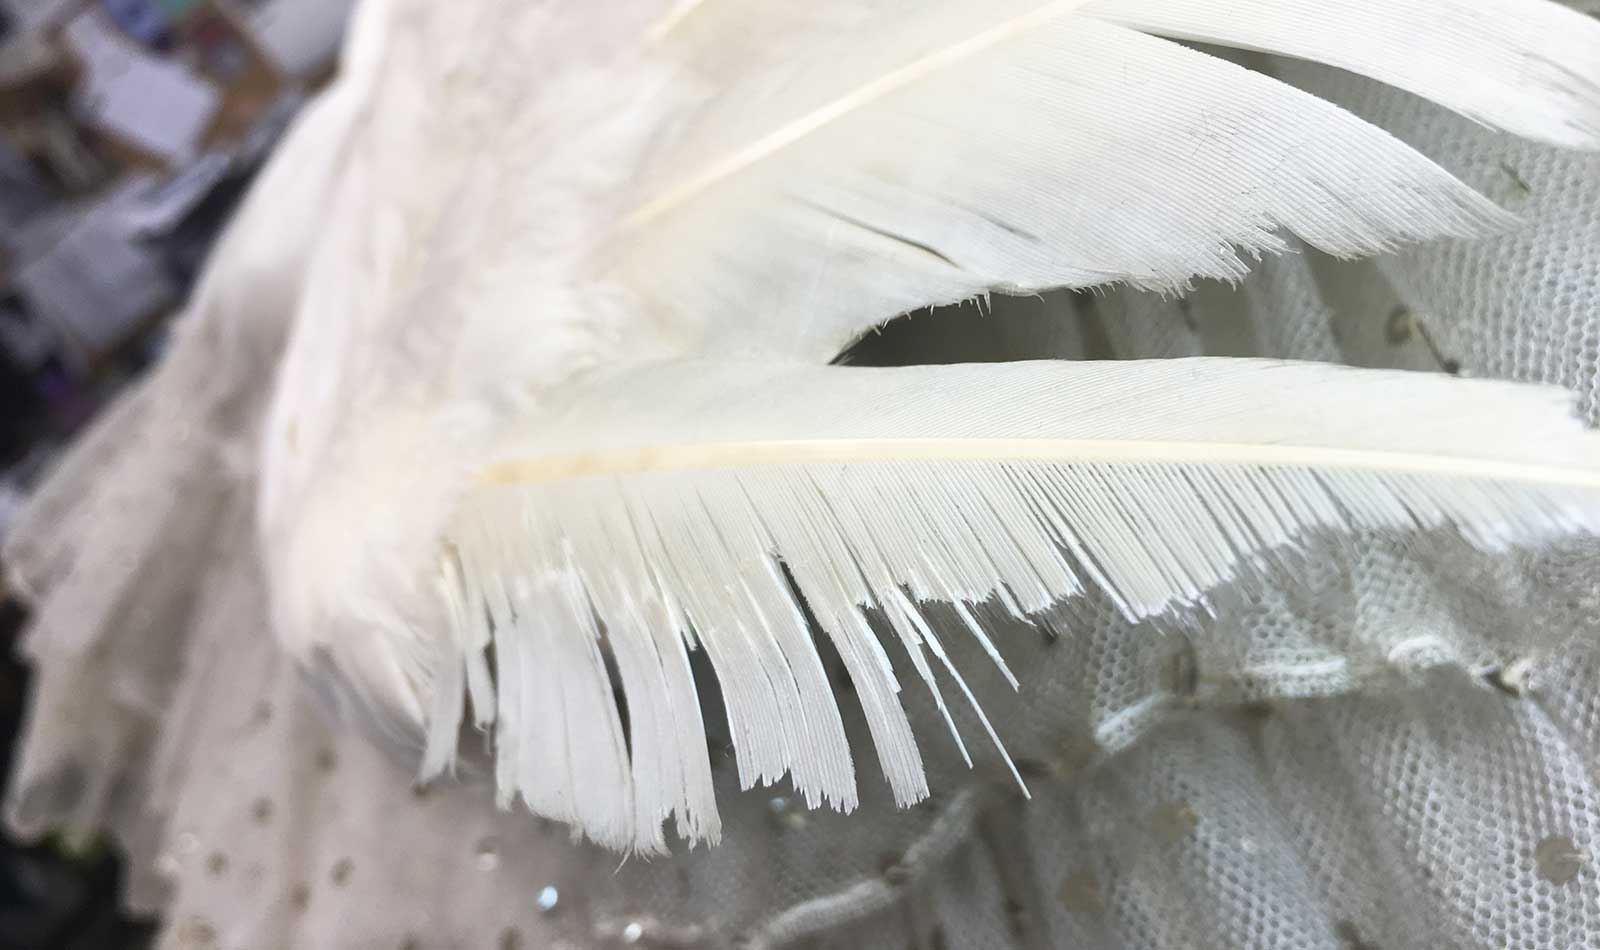 Large ‘wing’ feathers being humidified with dampened muslin.